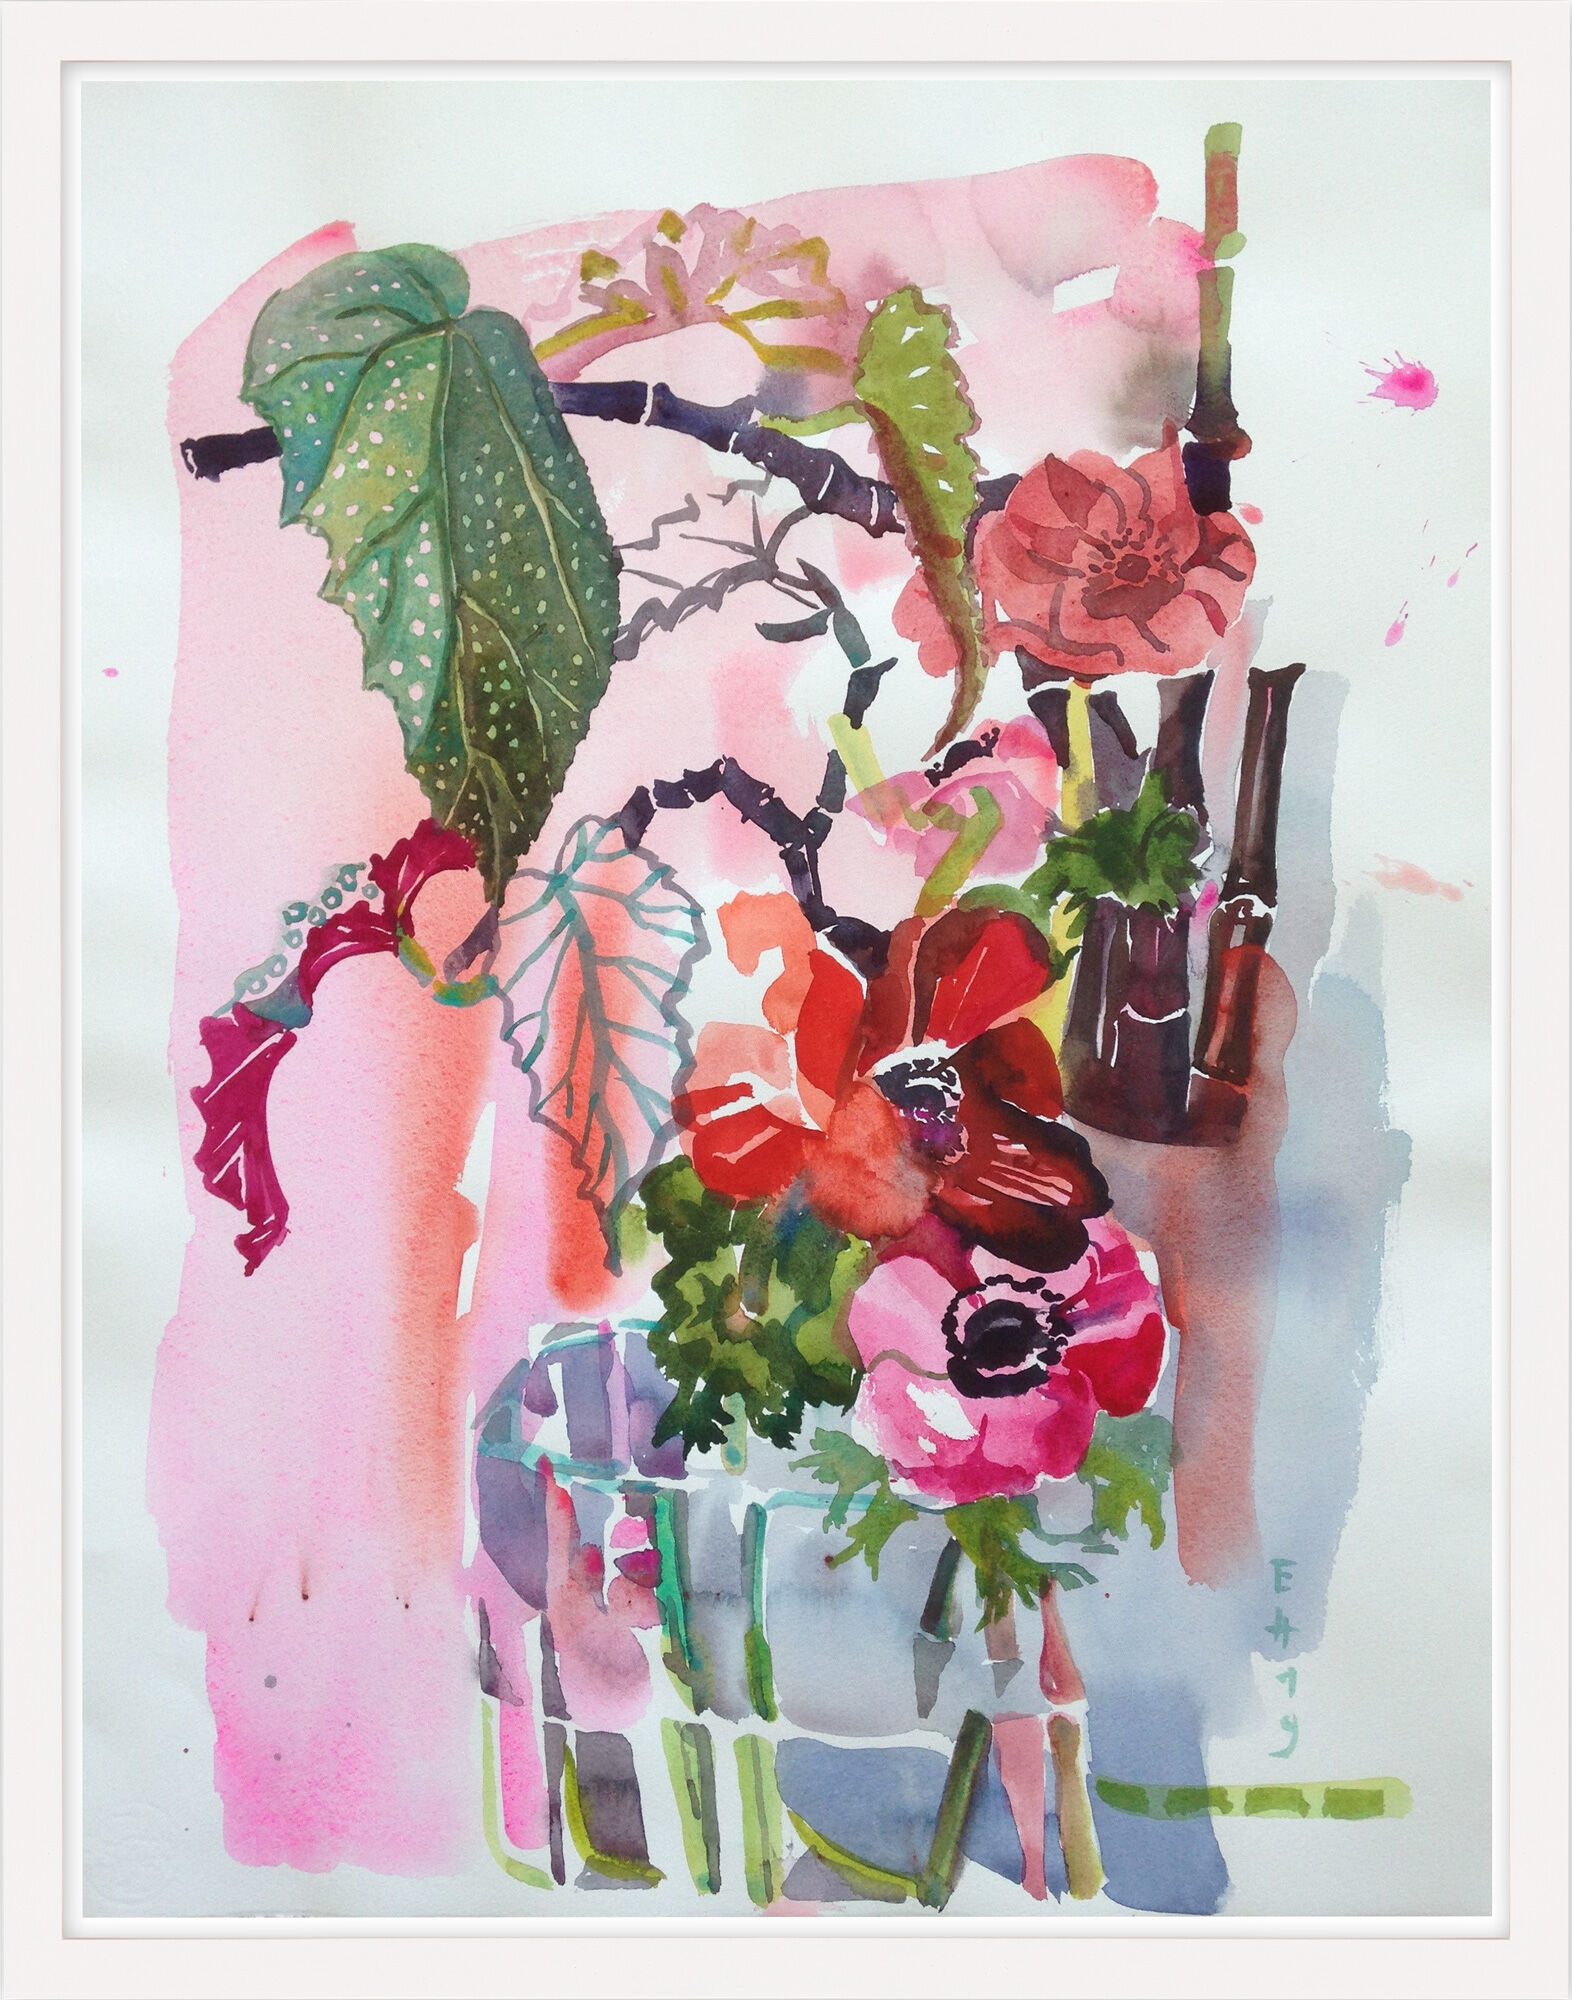 Picture "Ranunculus Pink" (2019) (Unique piece) by Evelyn Höfs